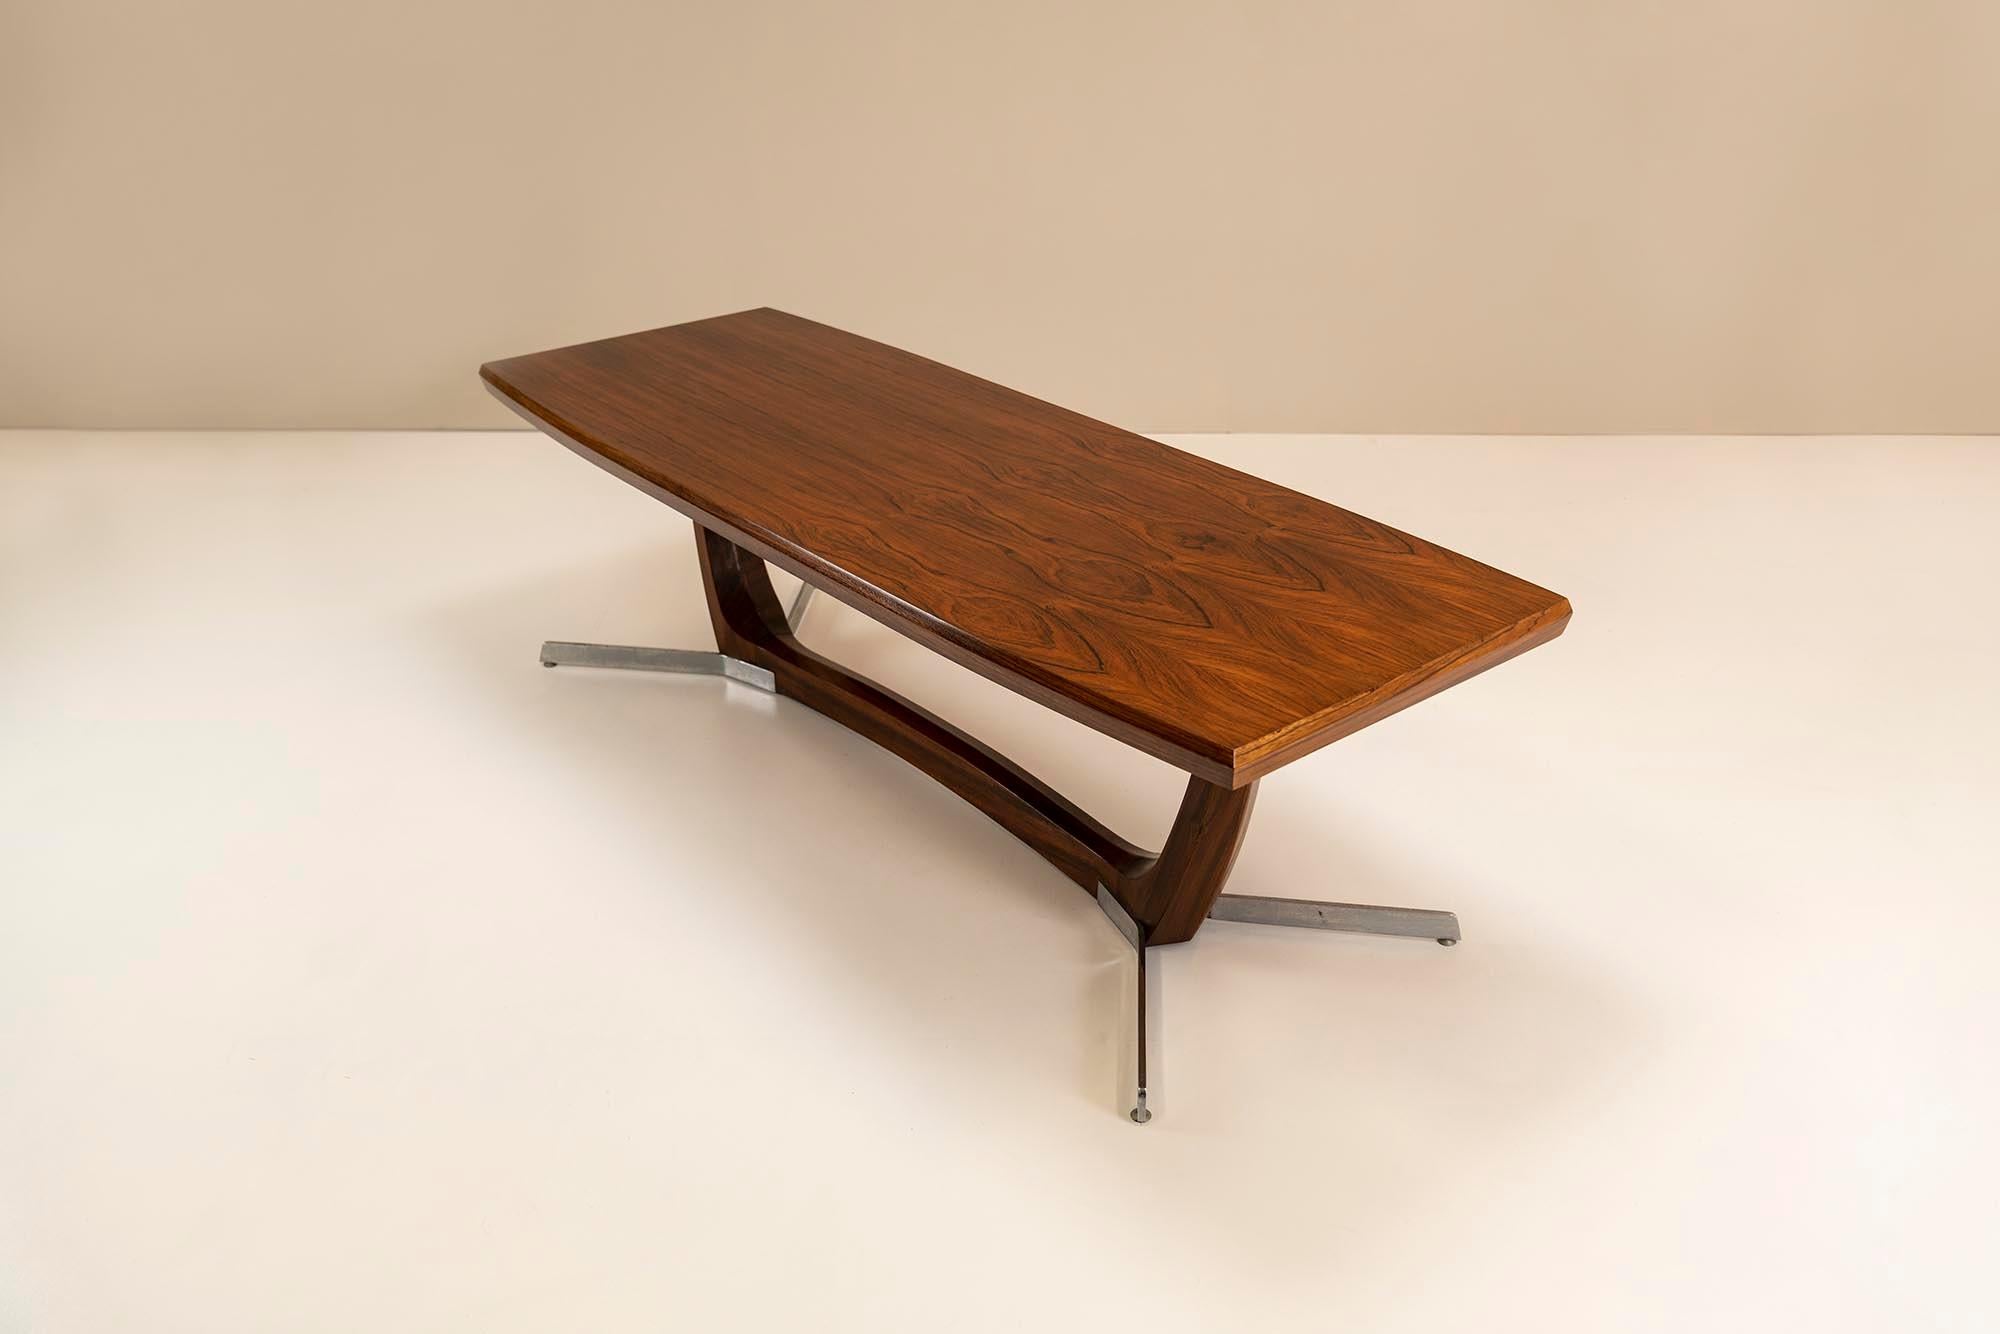 Architectural Large Coffee Table in Rosewood Veneer and Metal, 1960s For Sale 3